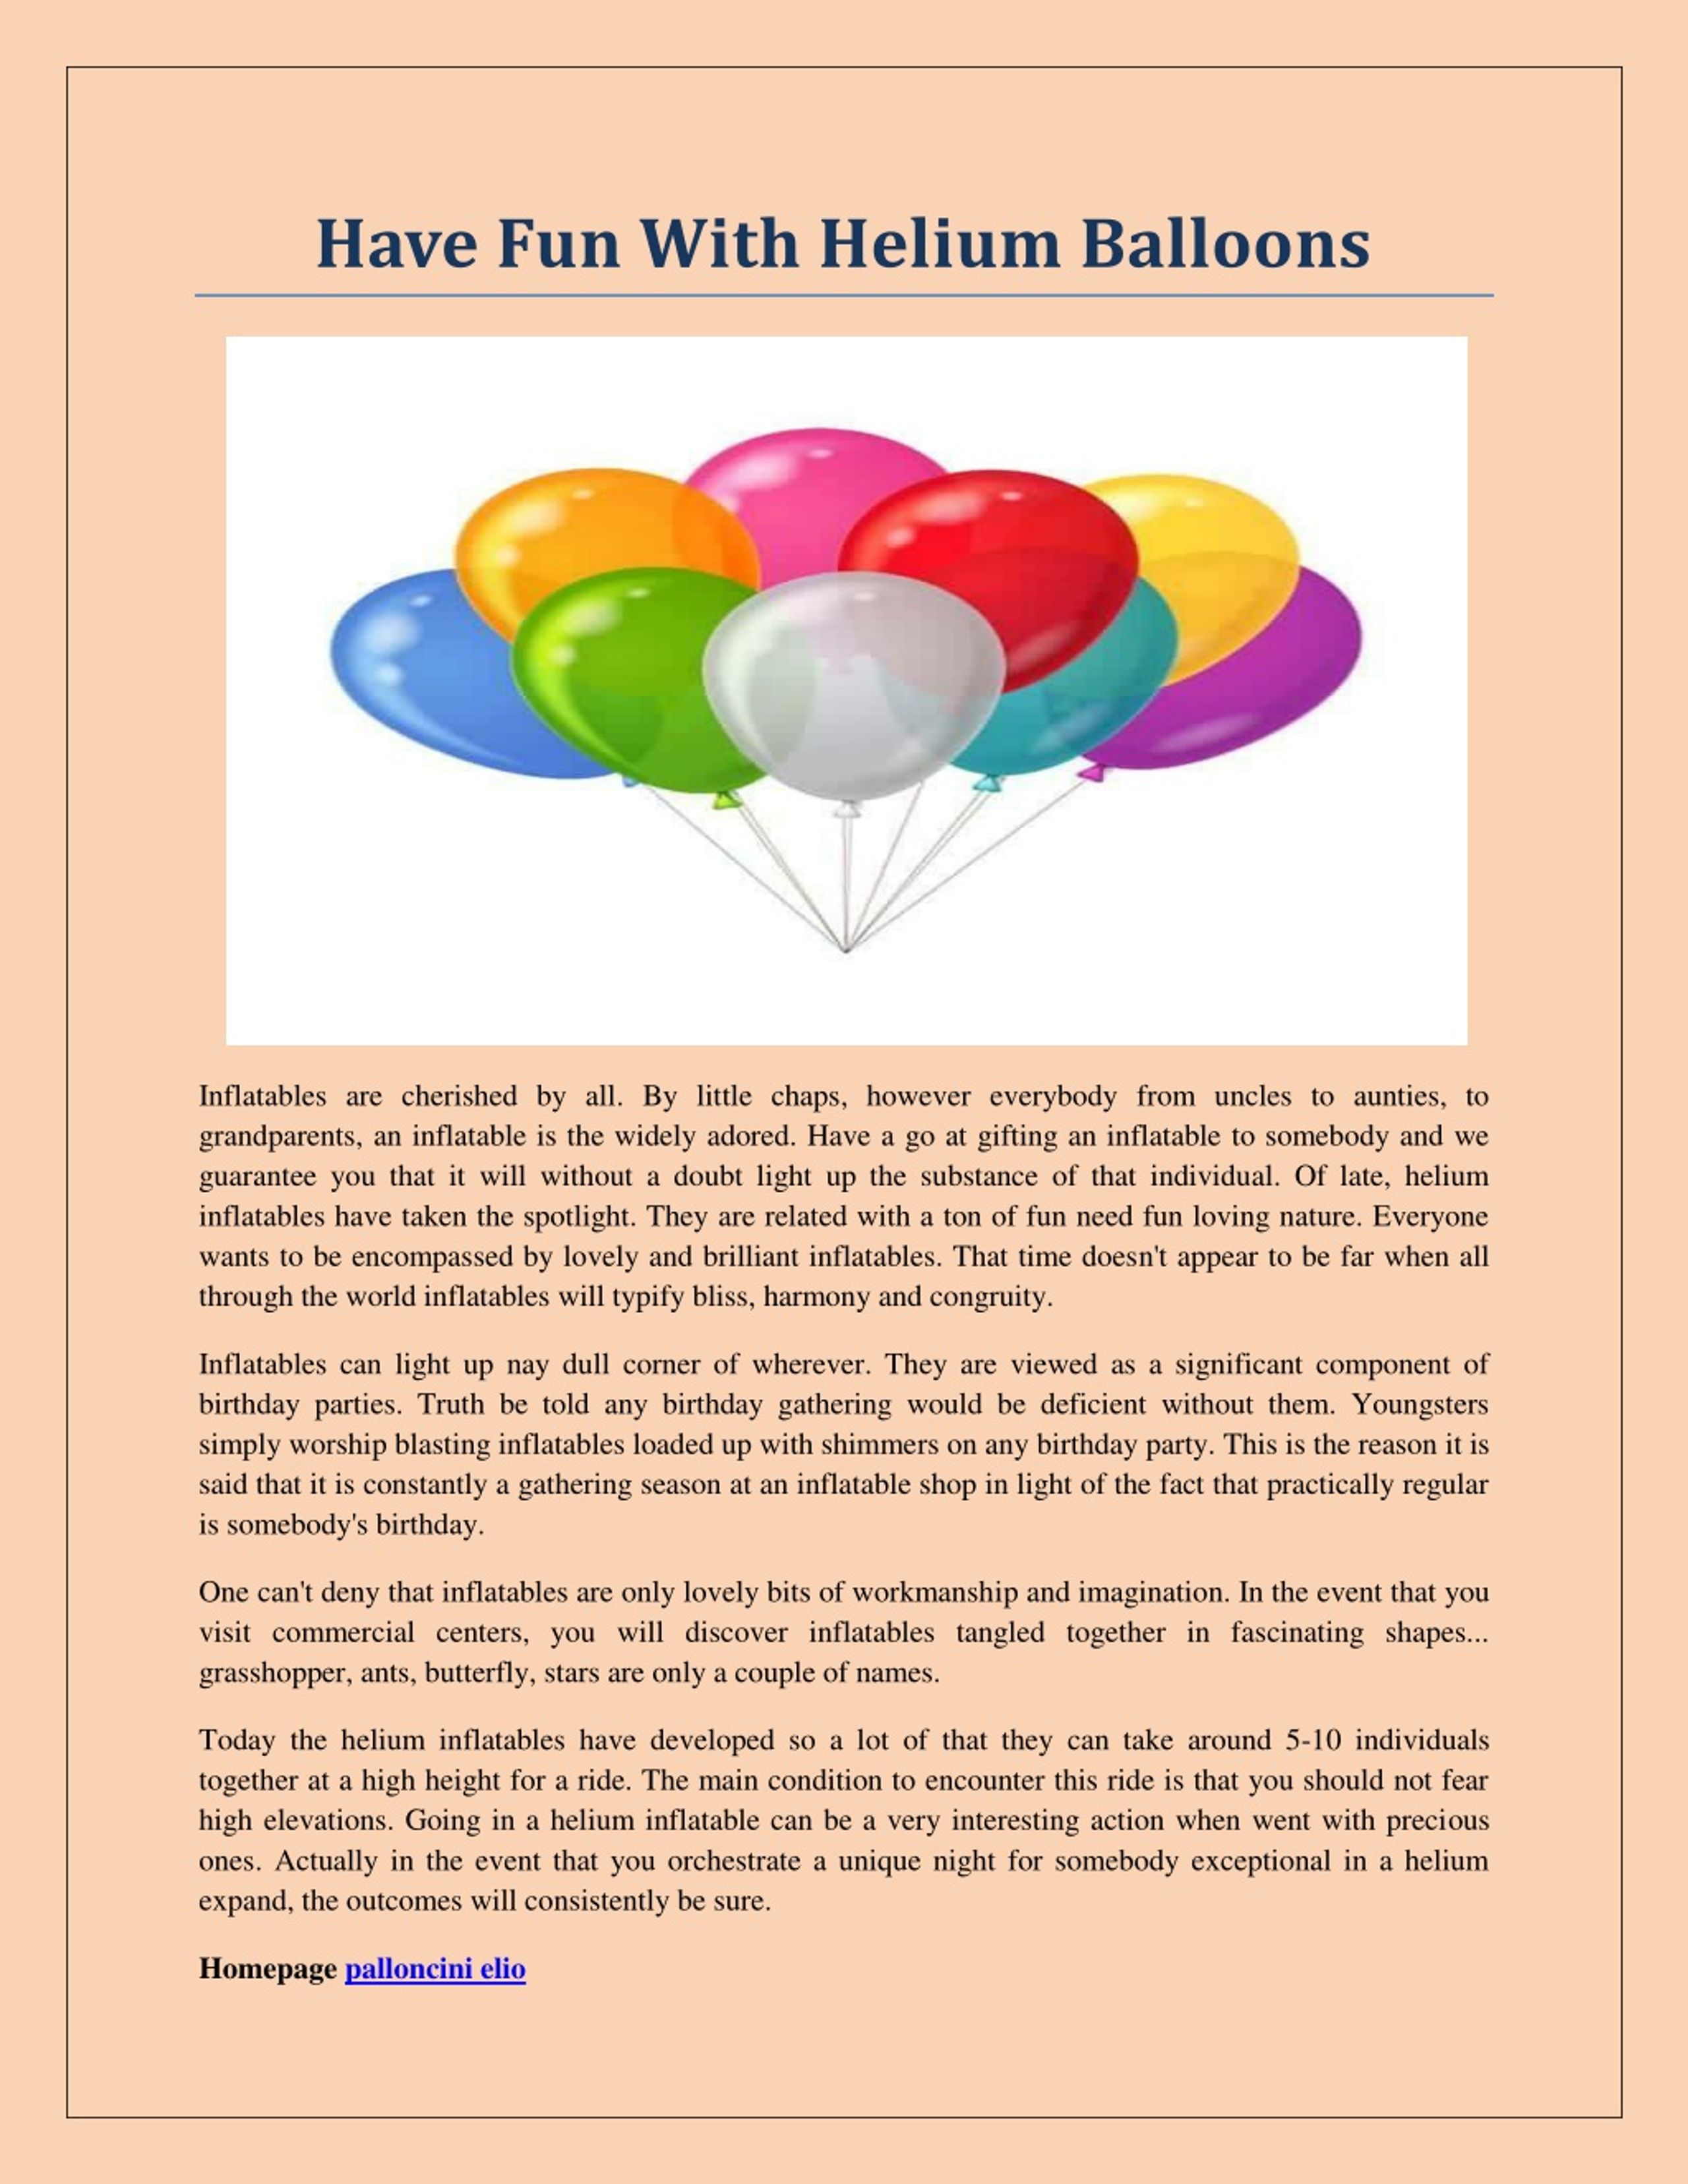 PPT - palloncini elio PowerPoint Presentation, free download - ID:8888236